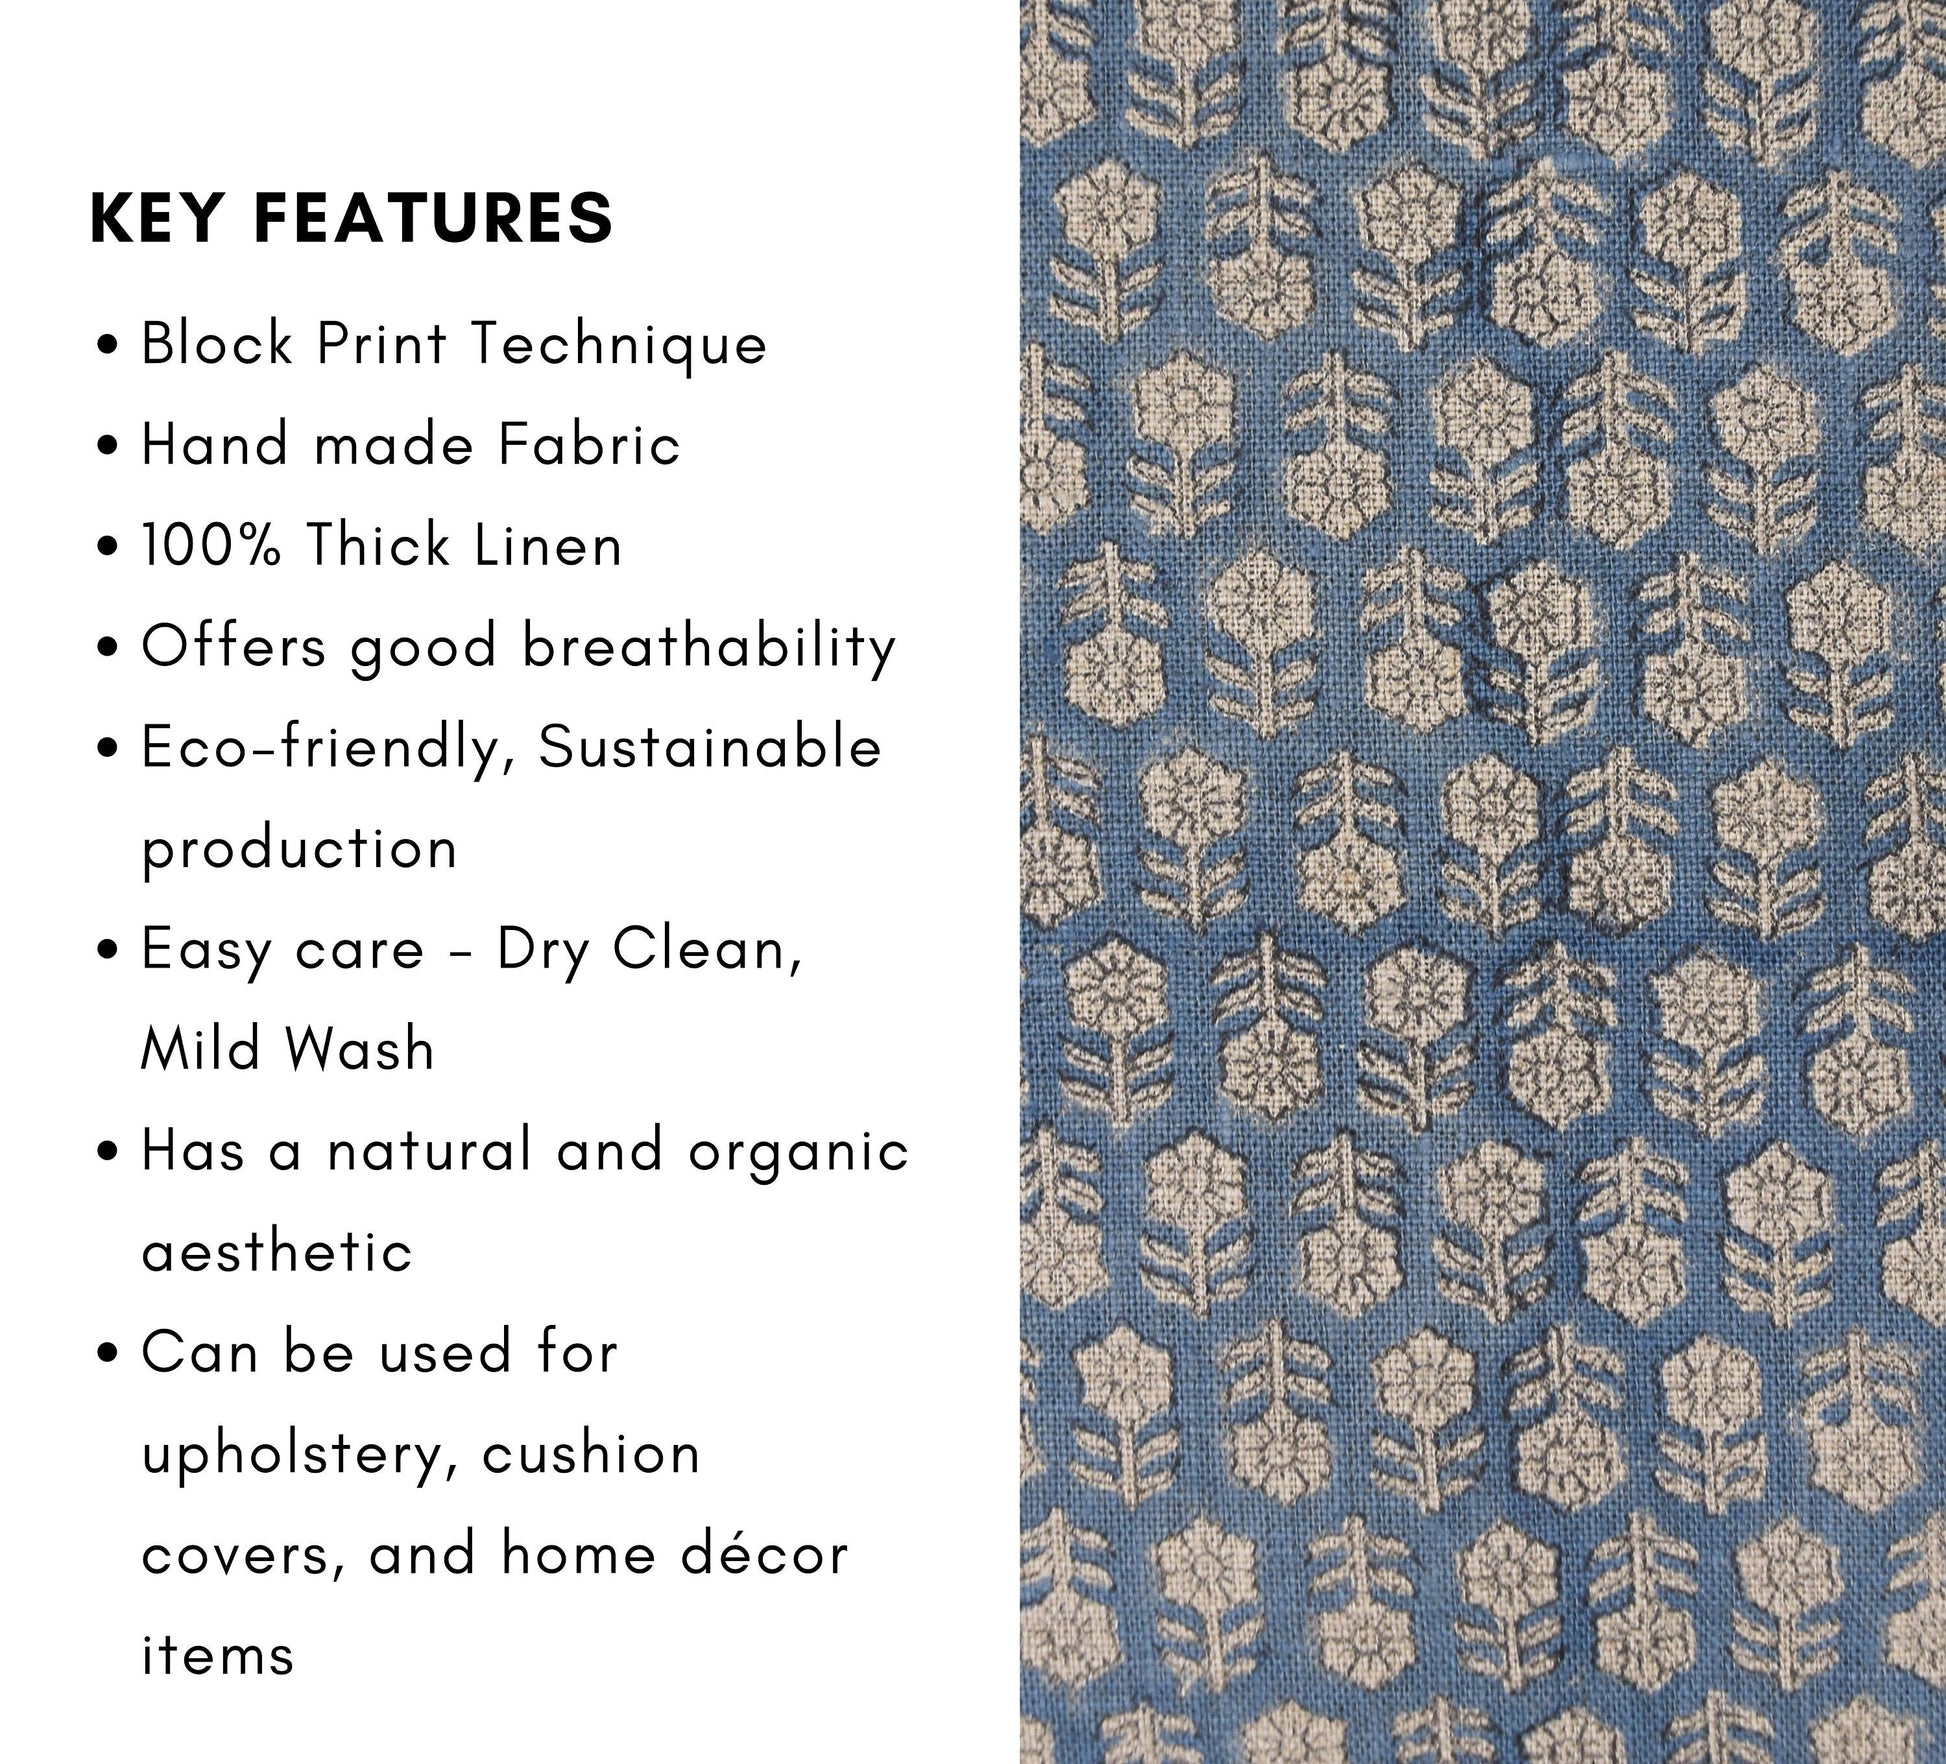 Block Print Thick Linen 58" Wide, handblock floral curtains, Indian fabric Cushion Cover, Blue color linen - Tusli Butti